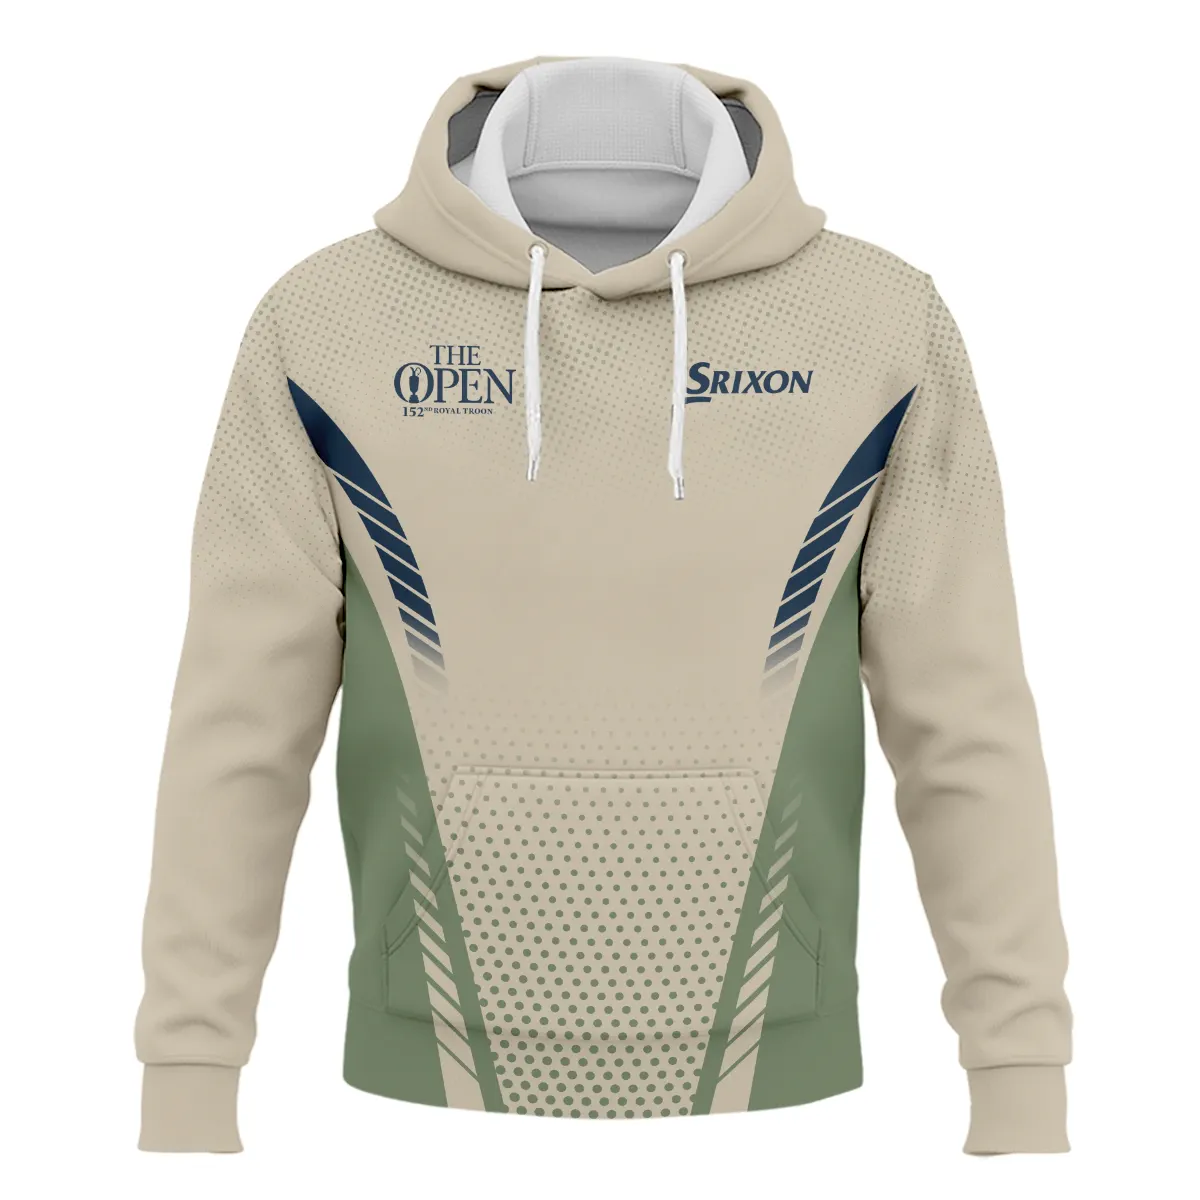 Special Release Tan Green Srixon Golf 152nd Open Championship Hoodie Shirt All Over Prints BLTOP090724A3SRIHD